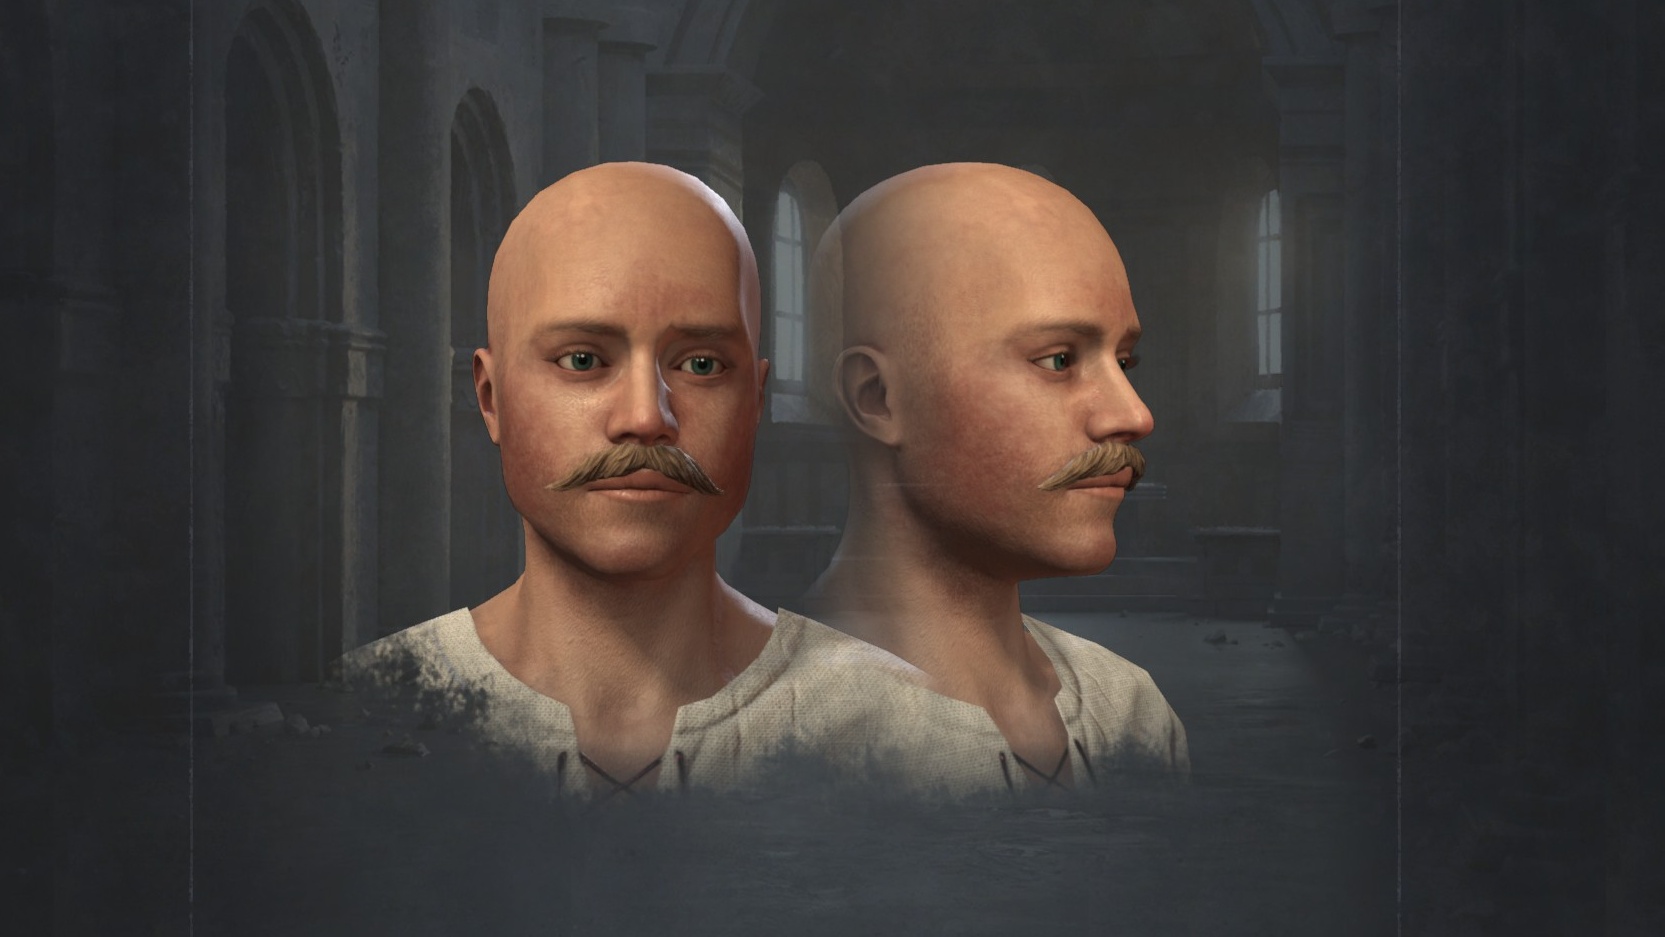  Crusader Kings 3 finally gets its most hotly demanded feature in years: an authentic male pattern baldness system 